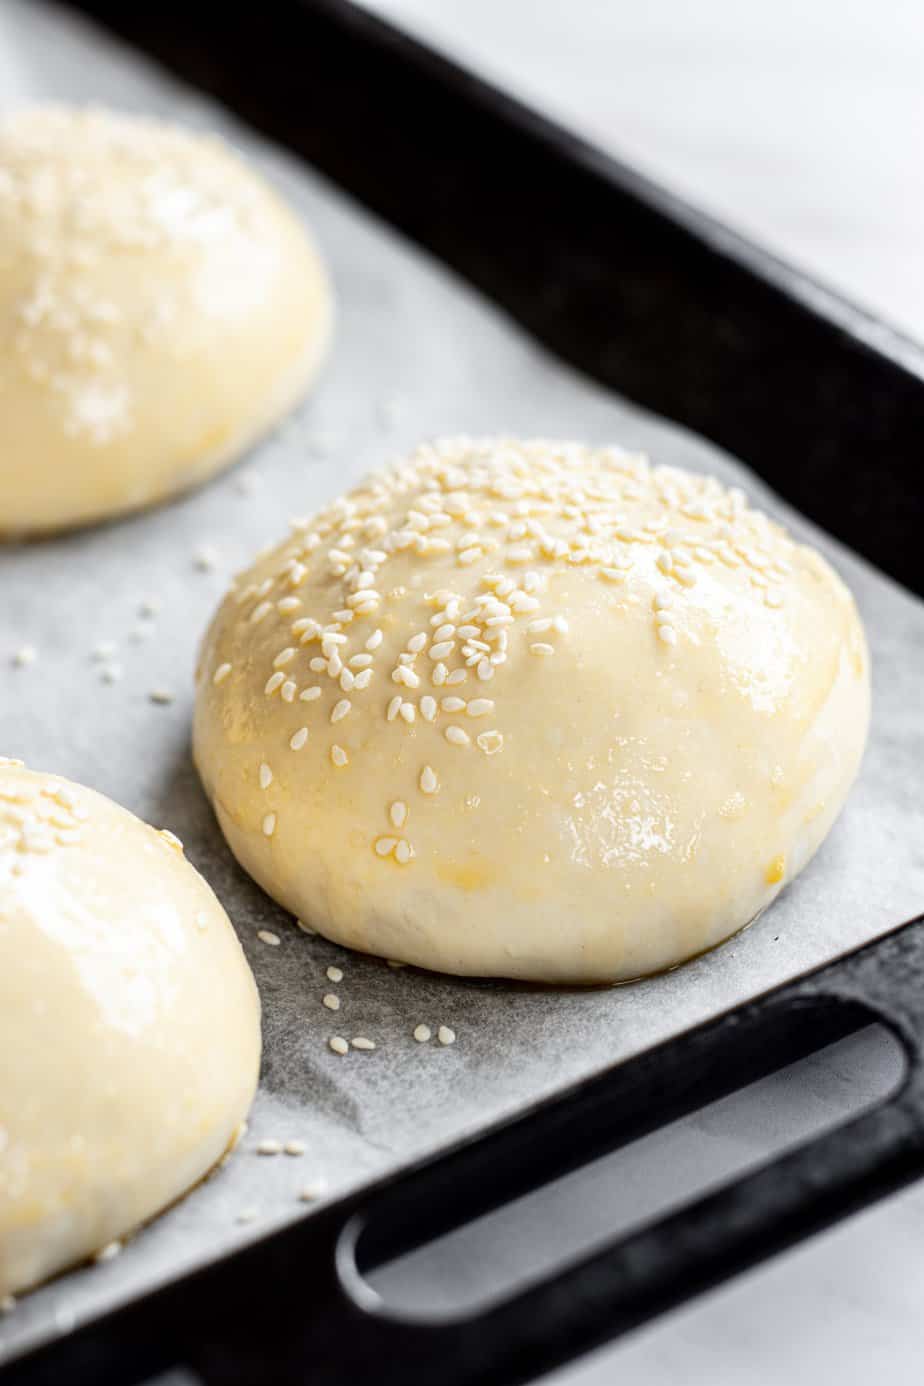 shaped burger bun rising with egg wash and sesame seeds